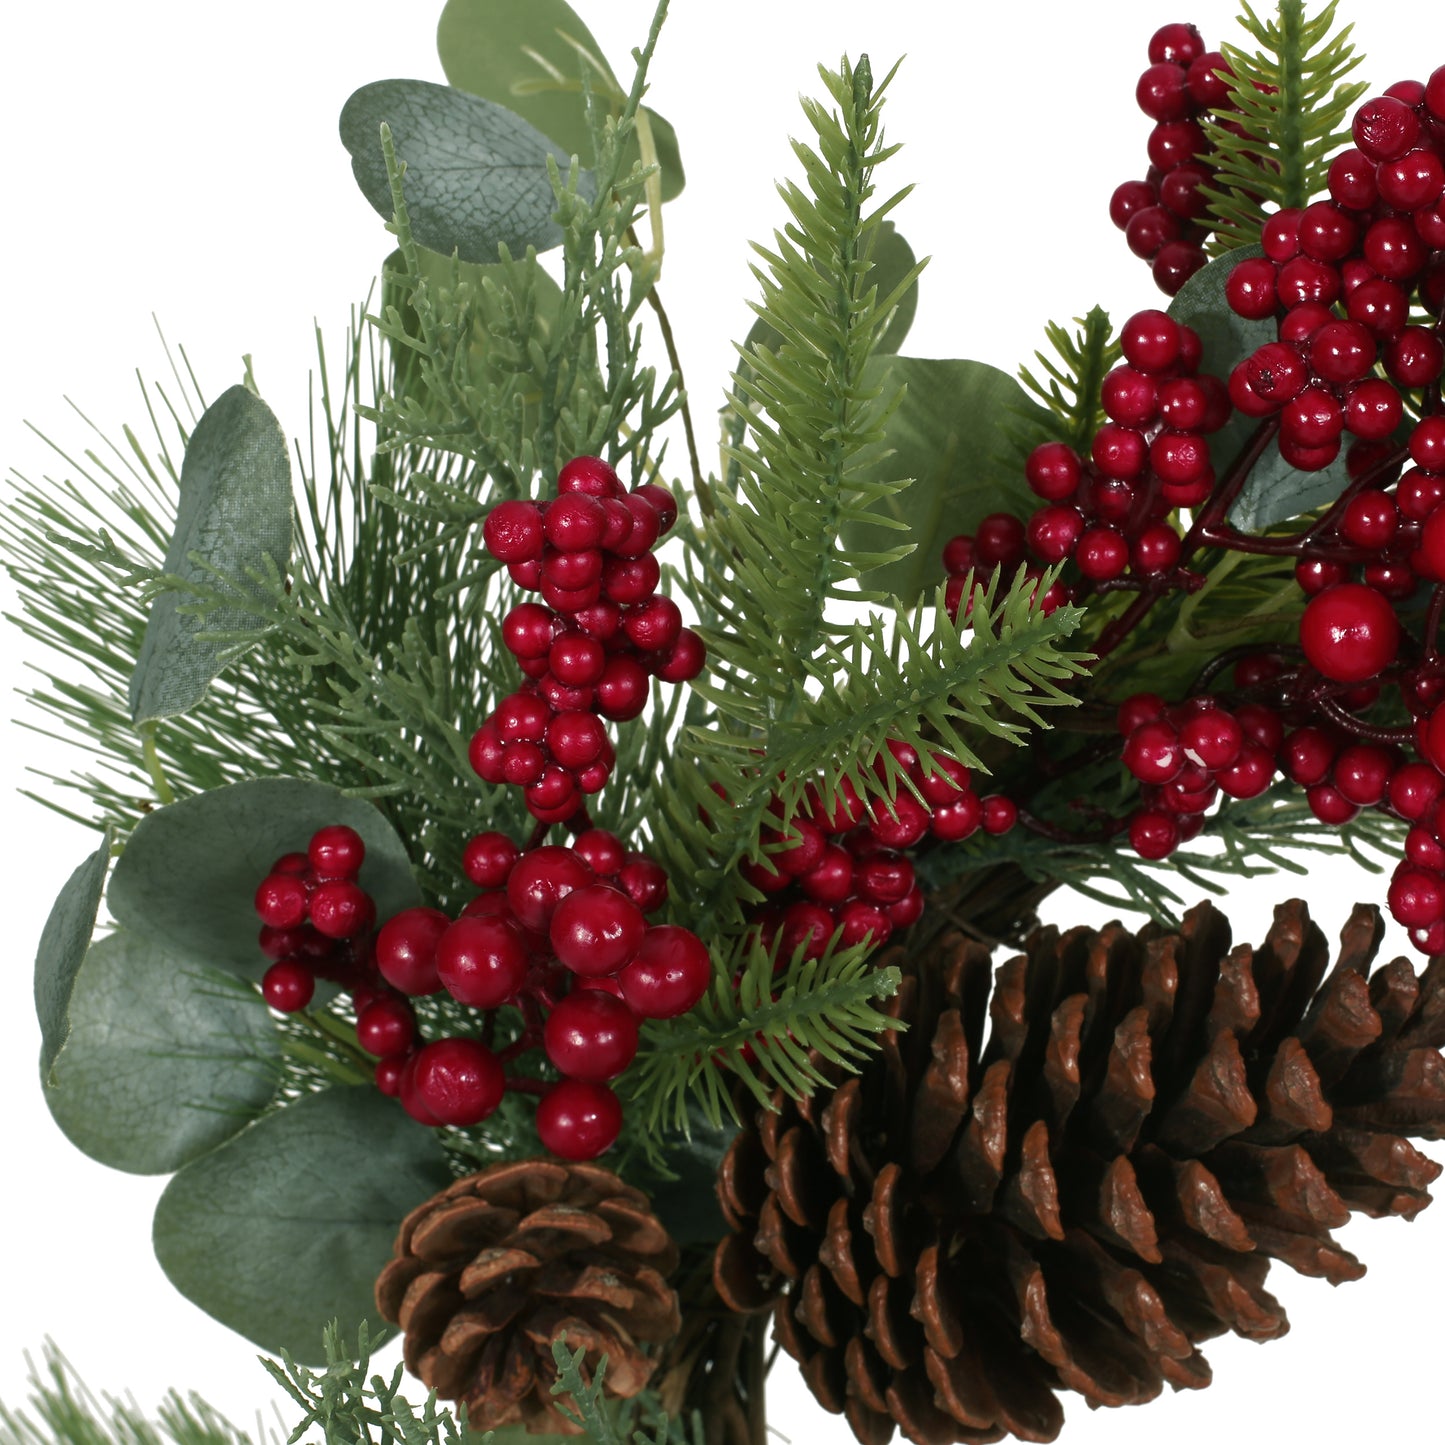 Torelli 22" Eucalyptus Artificial Wreath with Berries and Pinecones, Green and Red